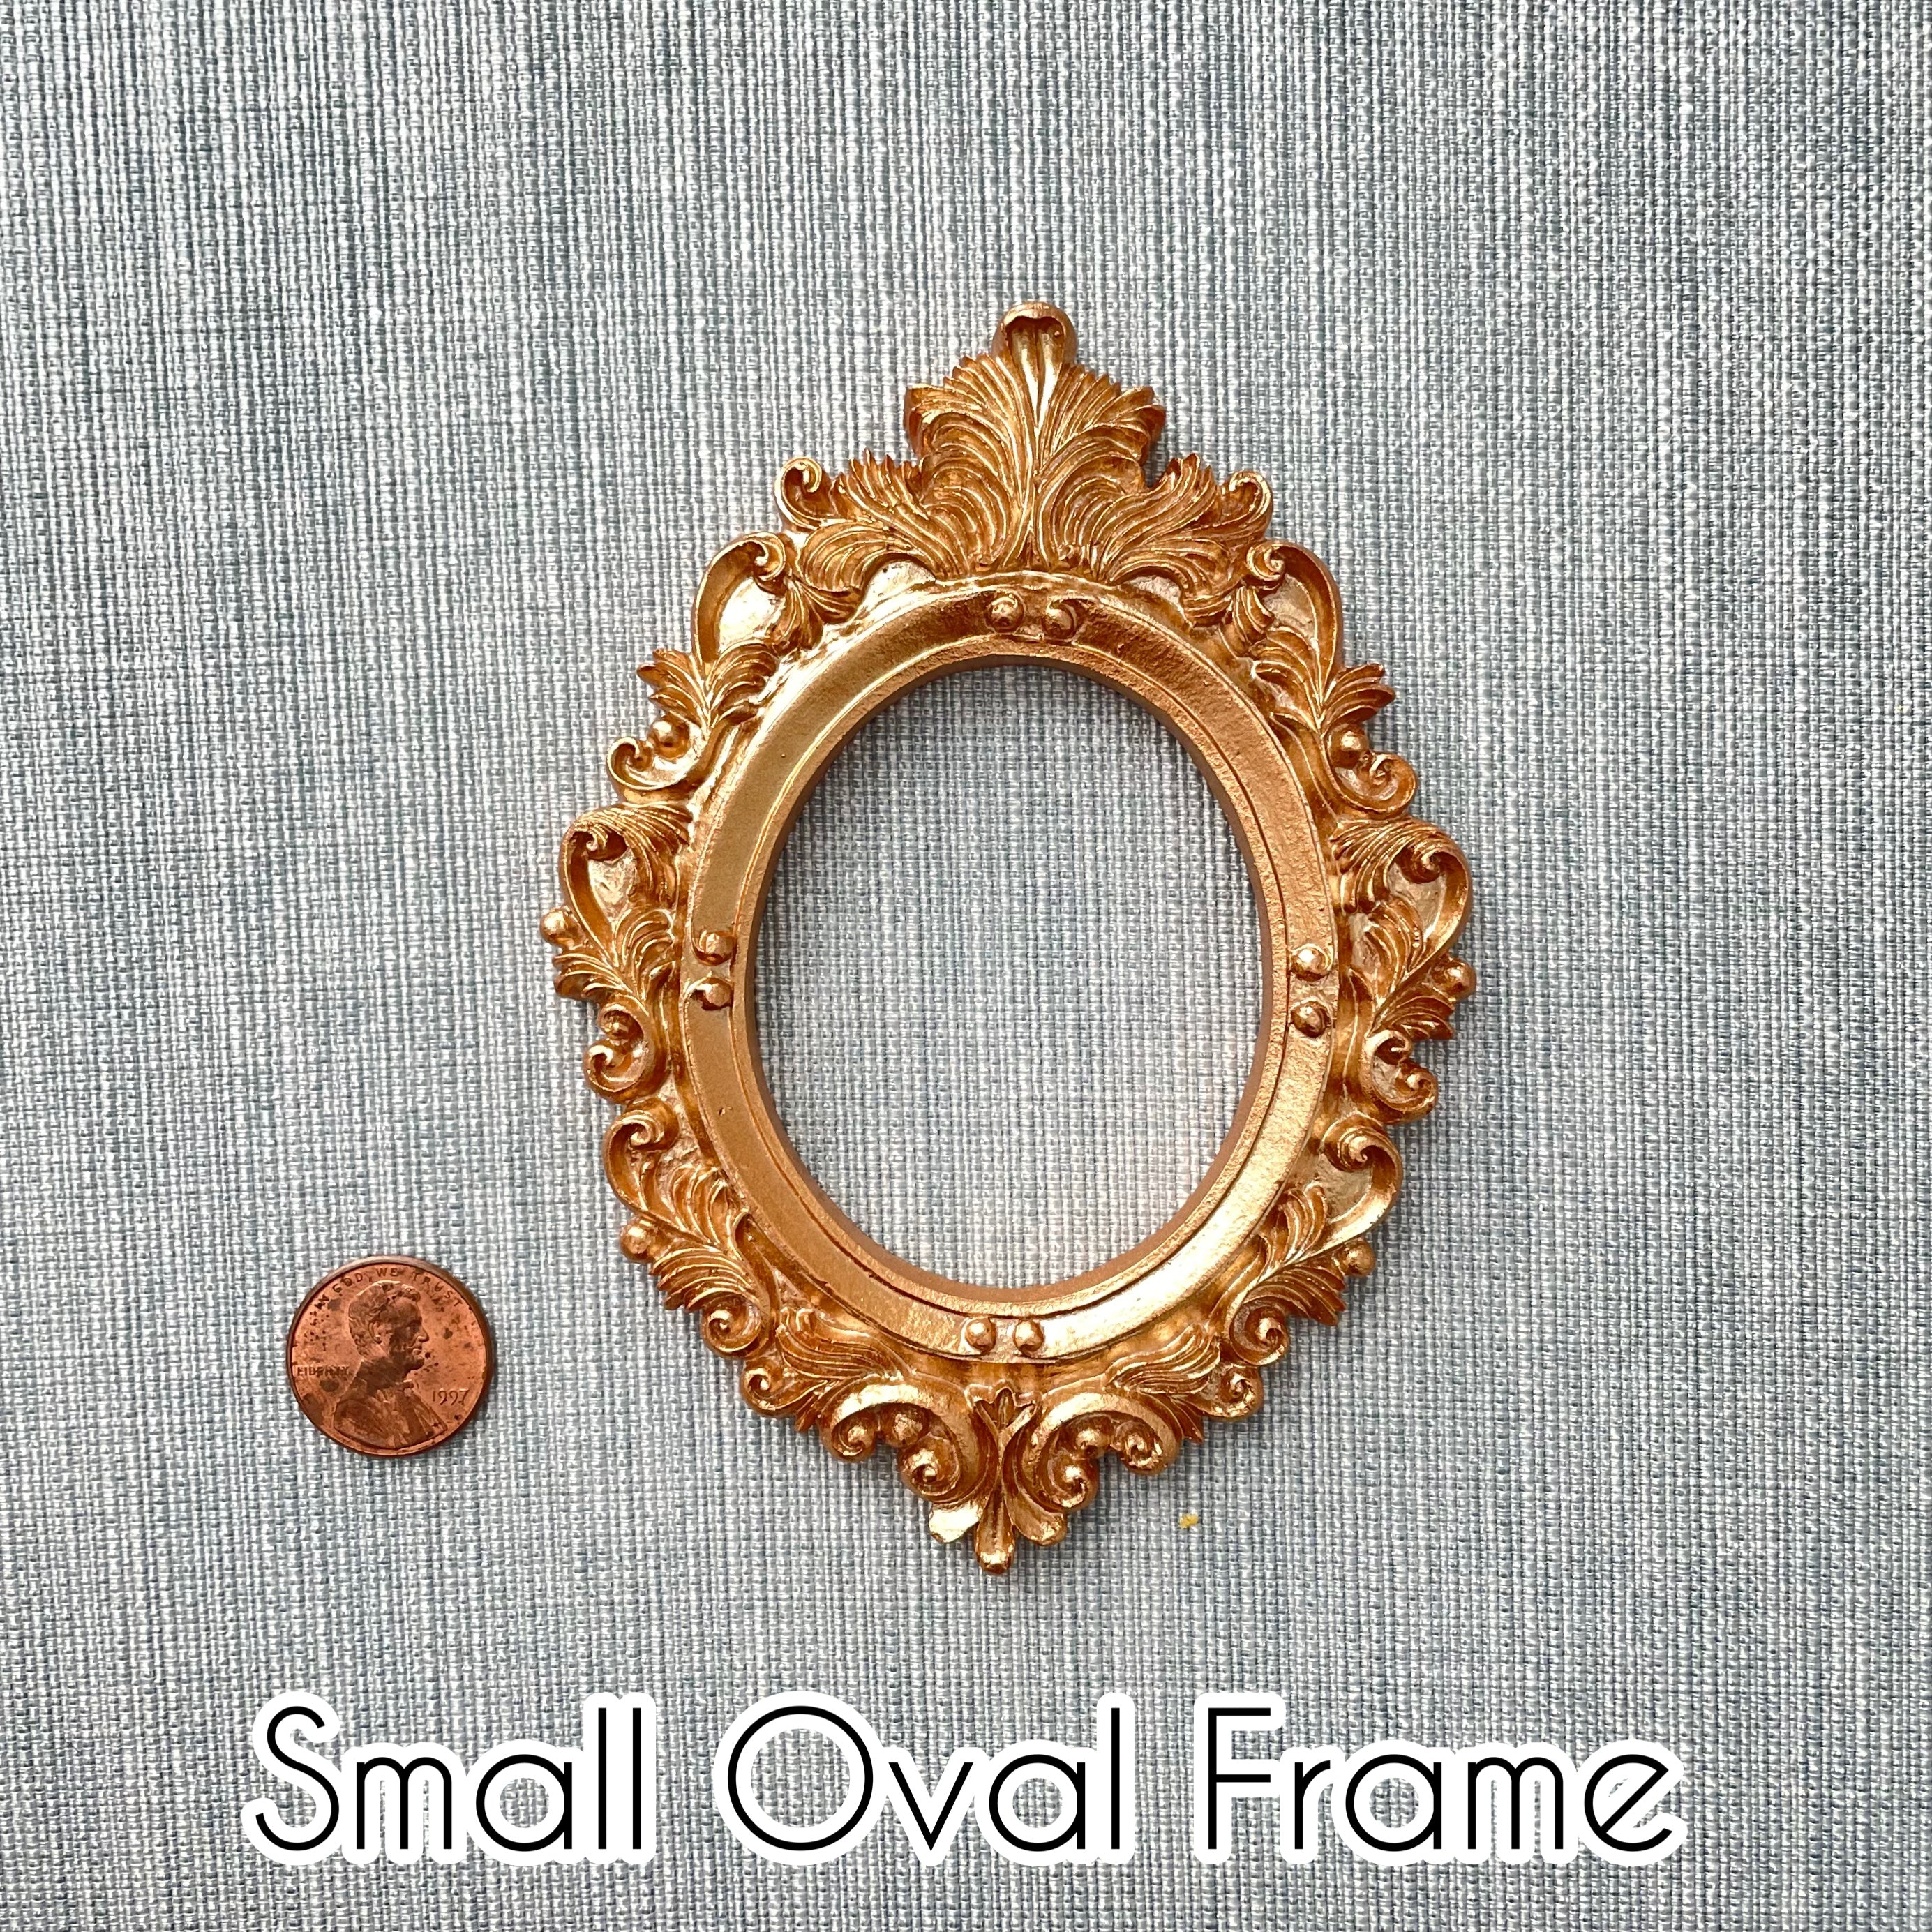 Flat Lay Prop Antique Gold Styling Frame